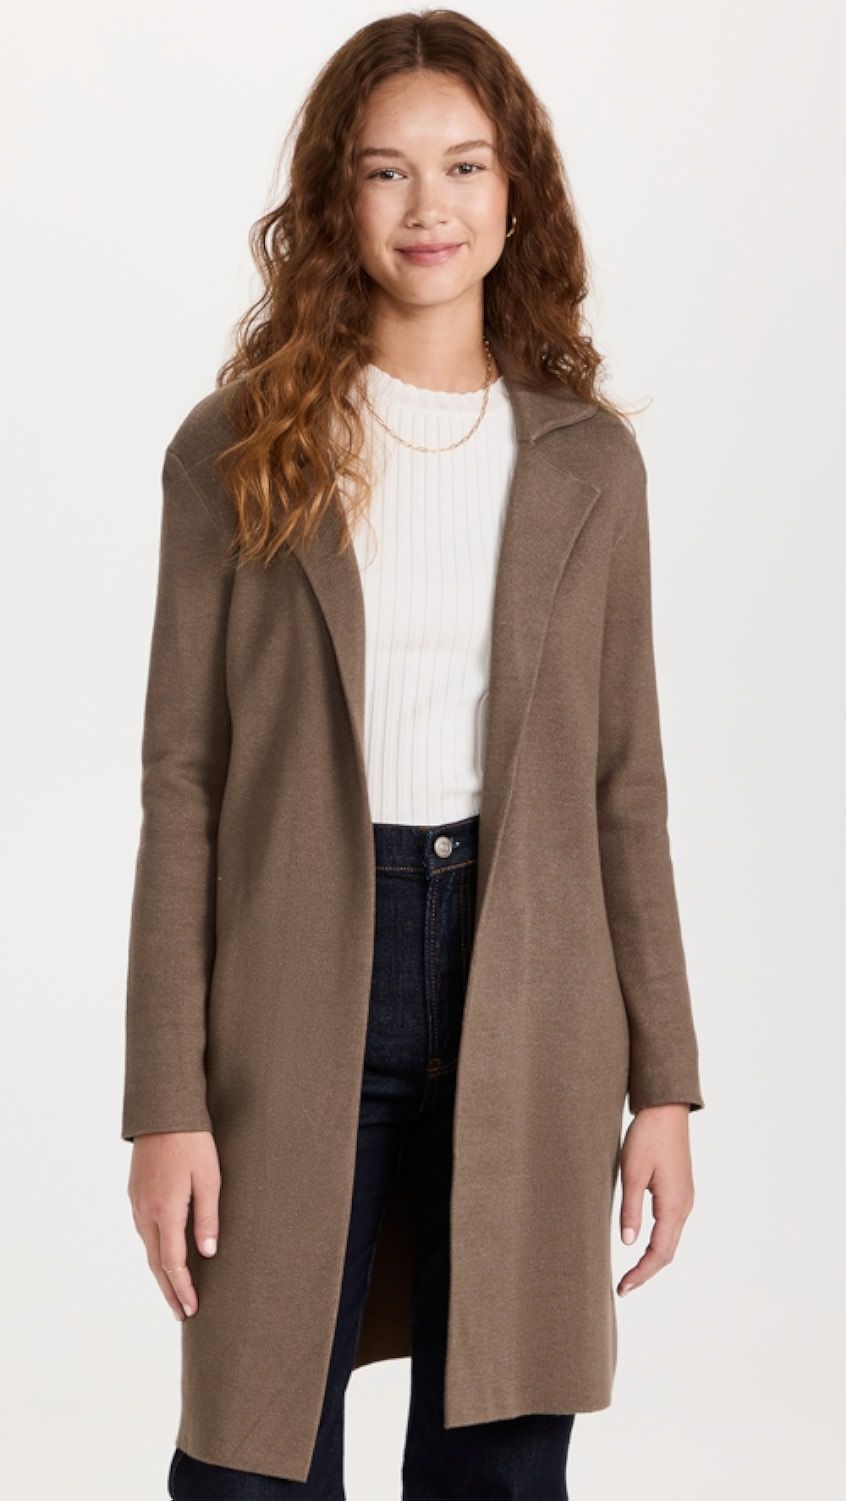 Supersoft Sweater Knit Cardigan | Shopbop